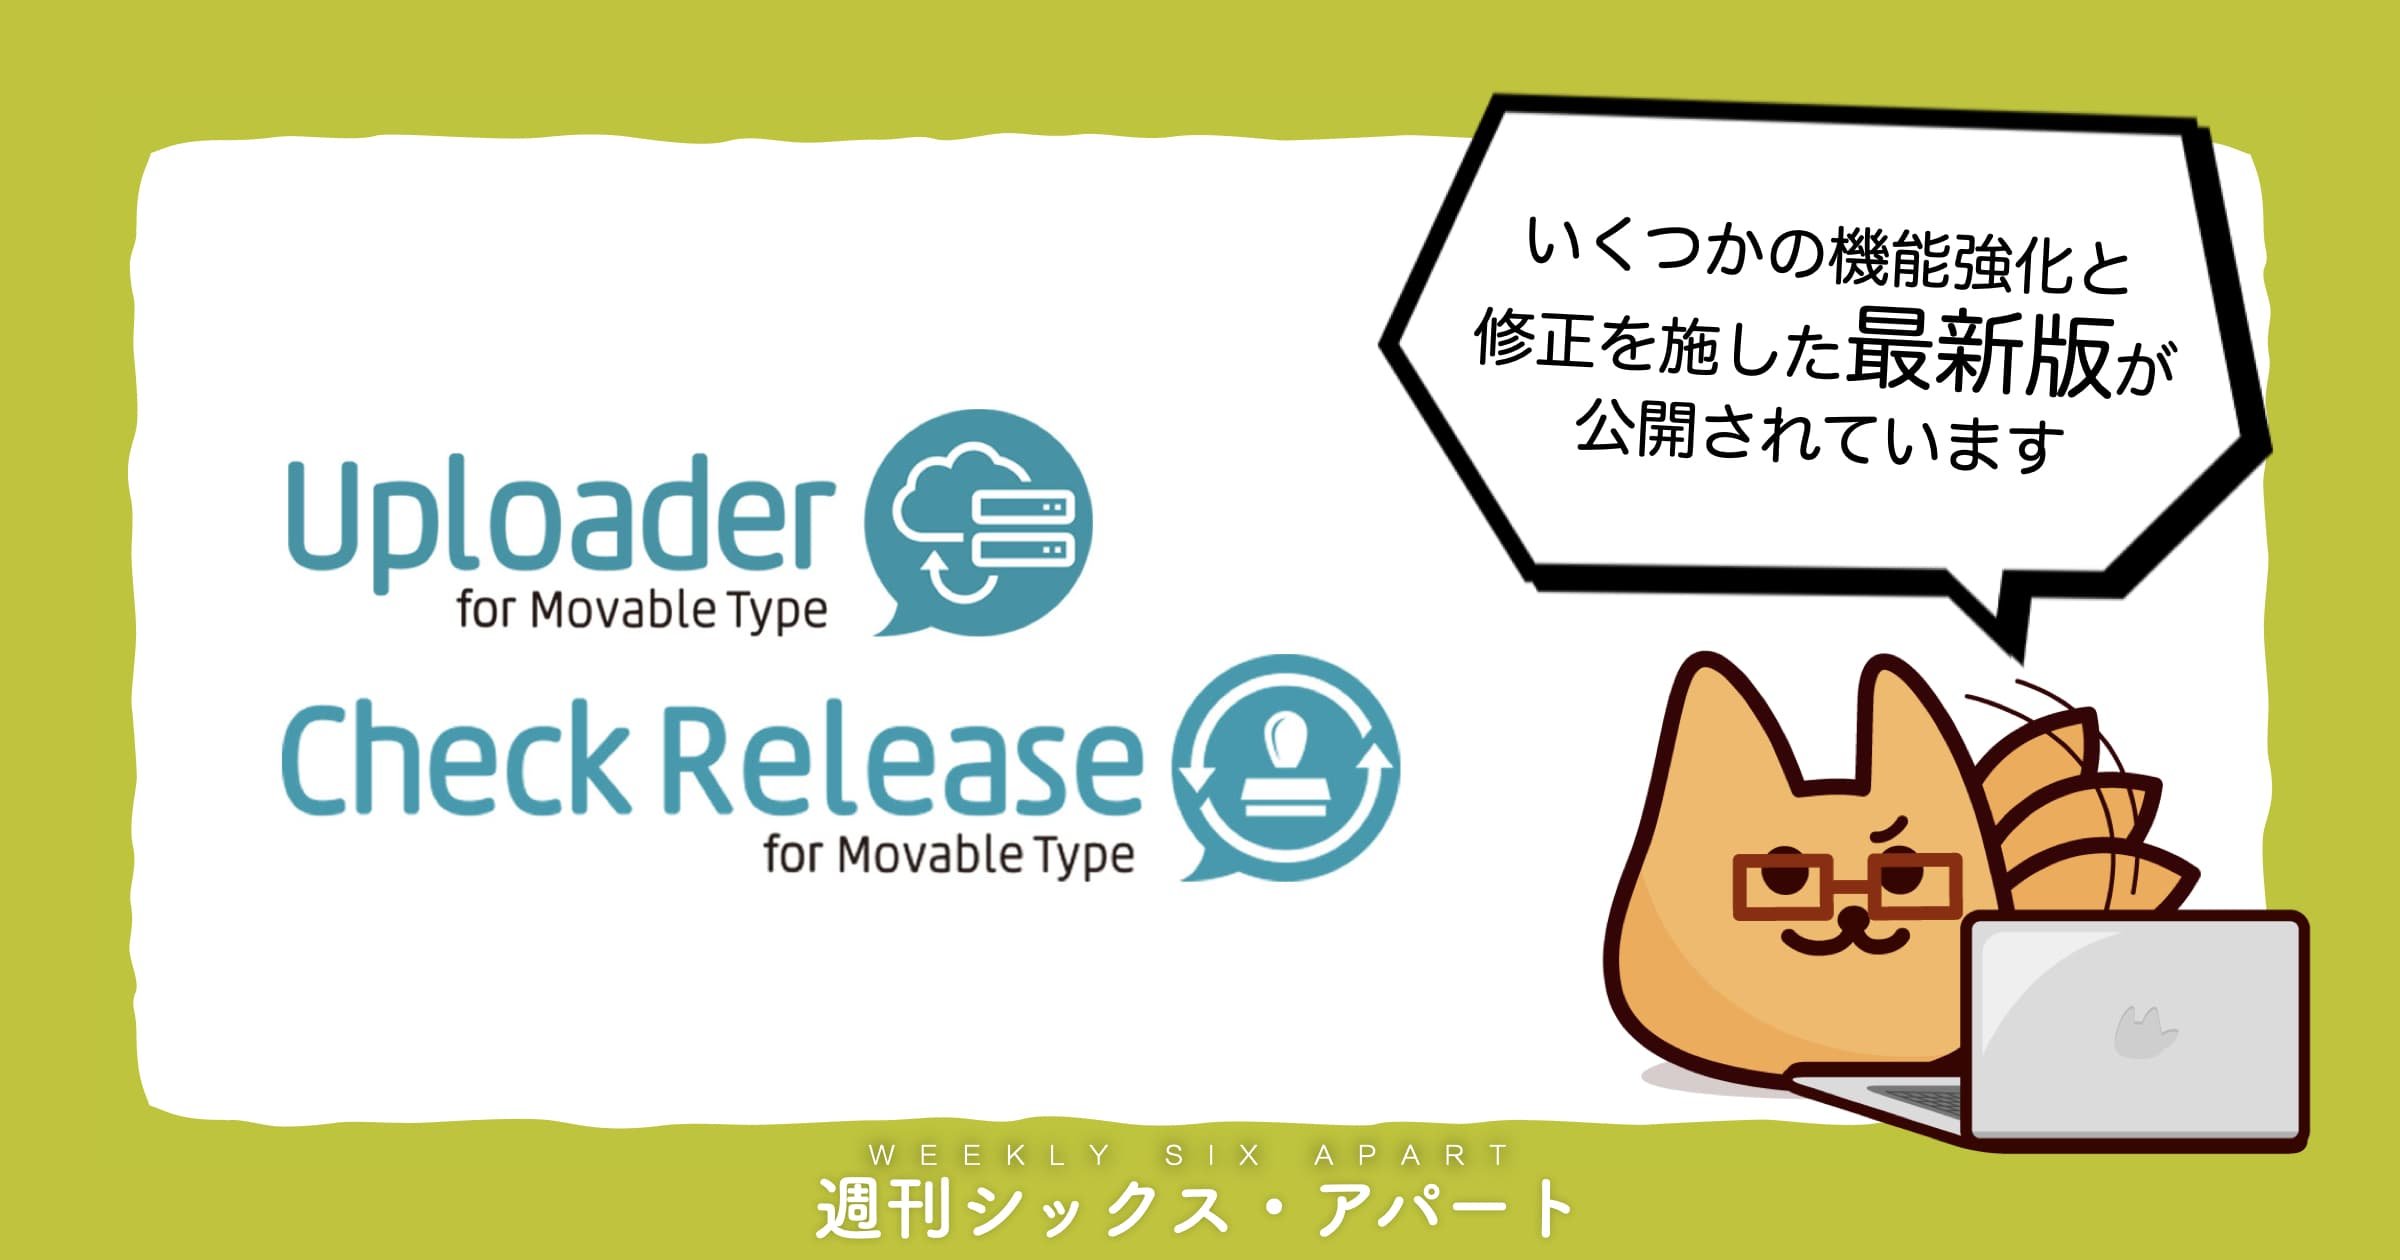 CheckRelease for Movable Type と Uploader for Movable Type 最新版をリリース #週刊SA